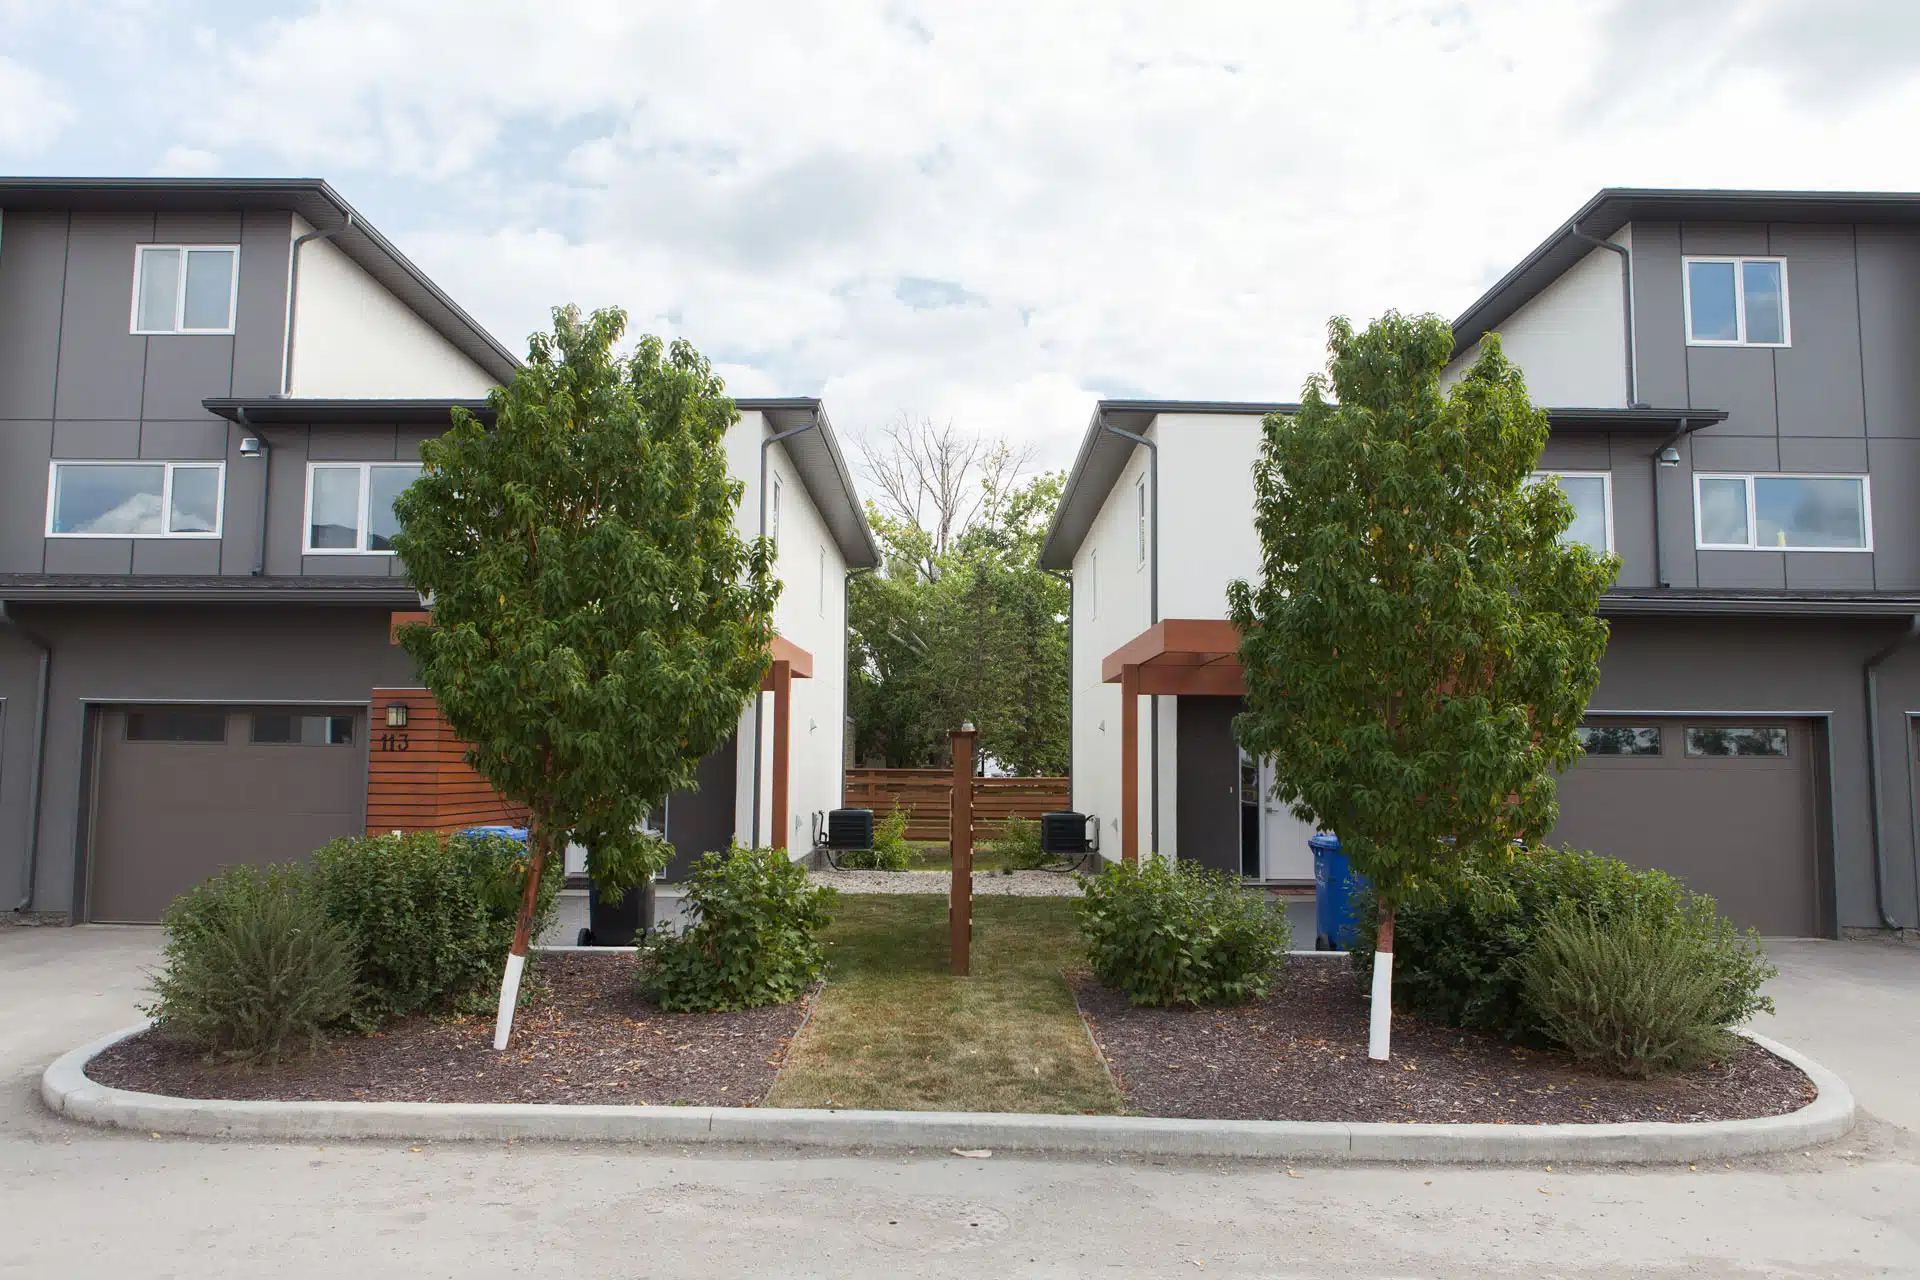 Two modern townhouses with garages, separated by landscaped walkway with trees and shrubs